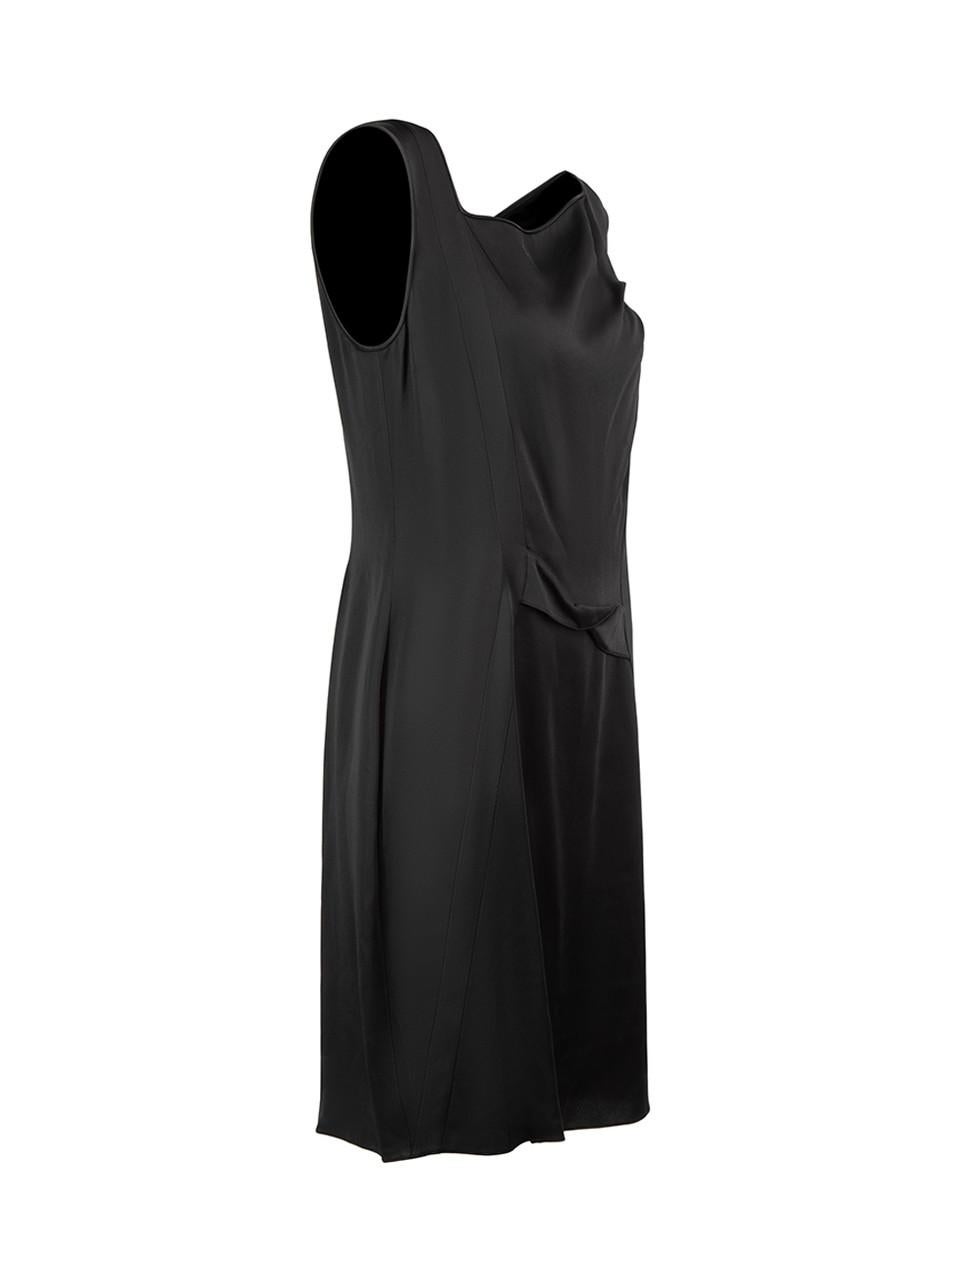 CONDITION is Very good. Minimal wear to dress is evident. Minimal pulls in fabric to back of shoulder strap on this used Christian Dior designer resale item.



Details


Black

Synthetic

Sleeveless mini dress

Asymmetrical square neckline

Twist